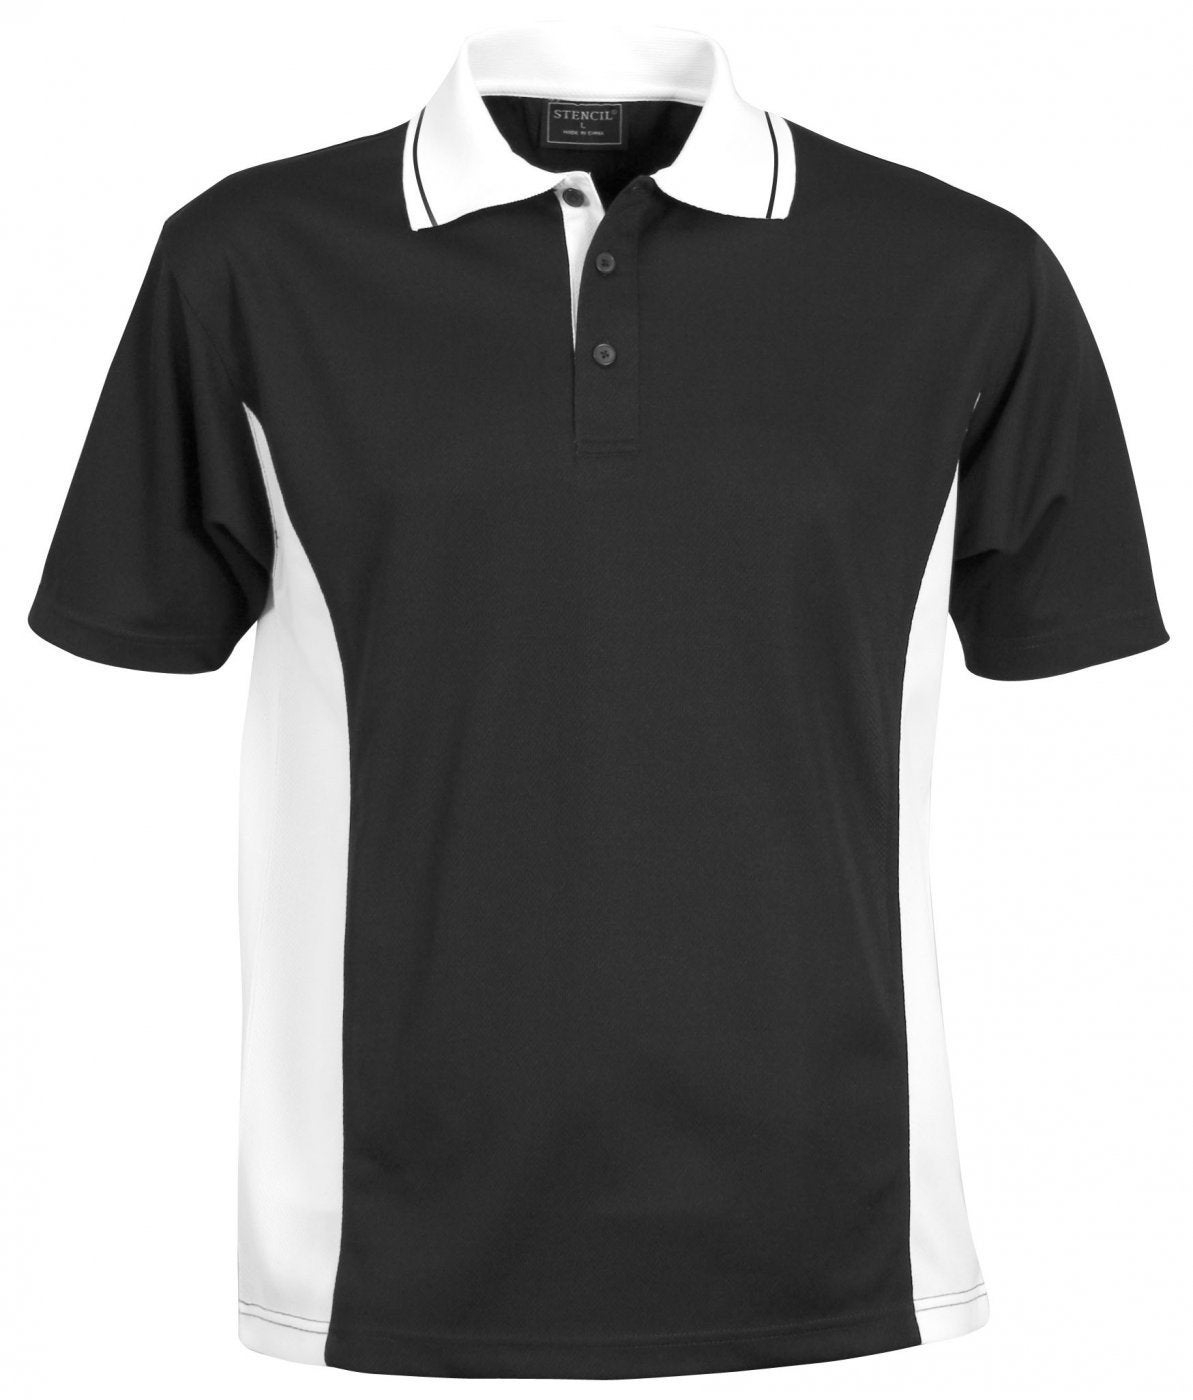 Buy custom branded Stencil Active Polos with your logo!